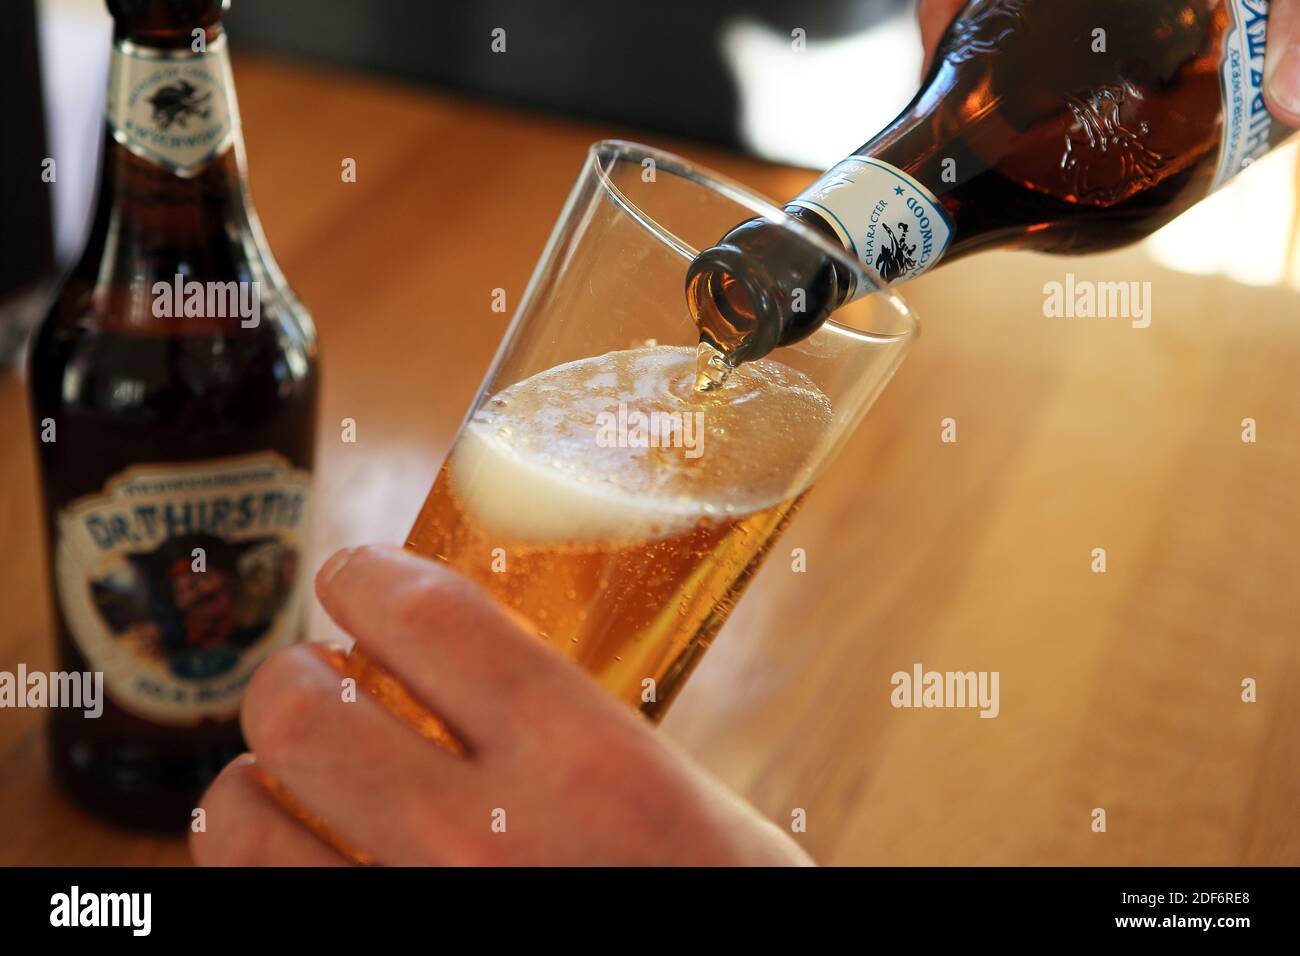 Dr Thirsty blonde beer from Wychwood Brewery in Oxfordshire being poured into a glass Stock Photo